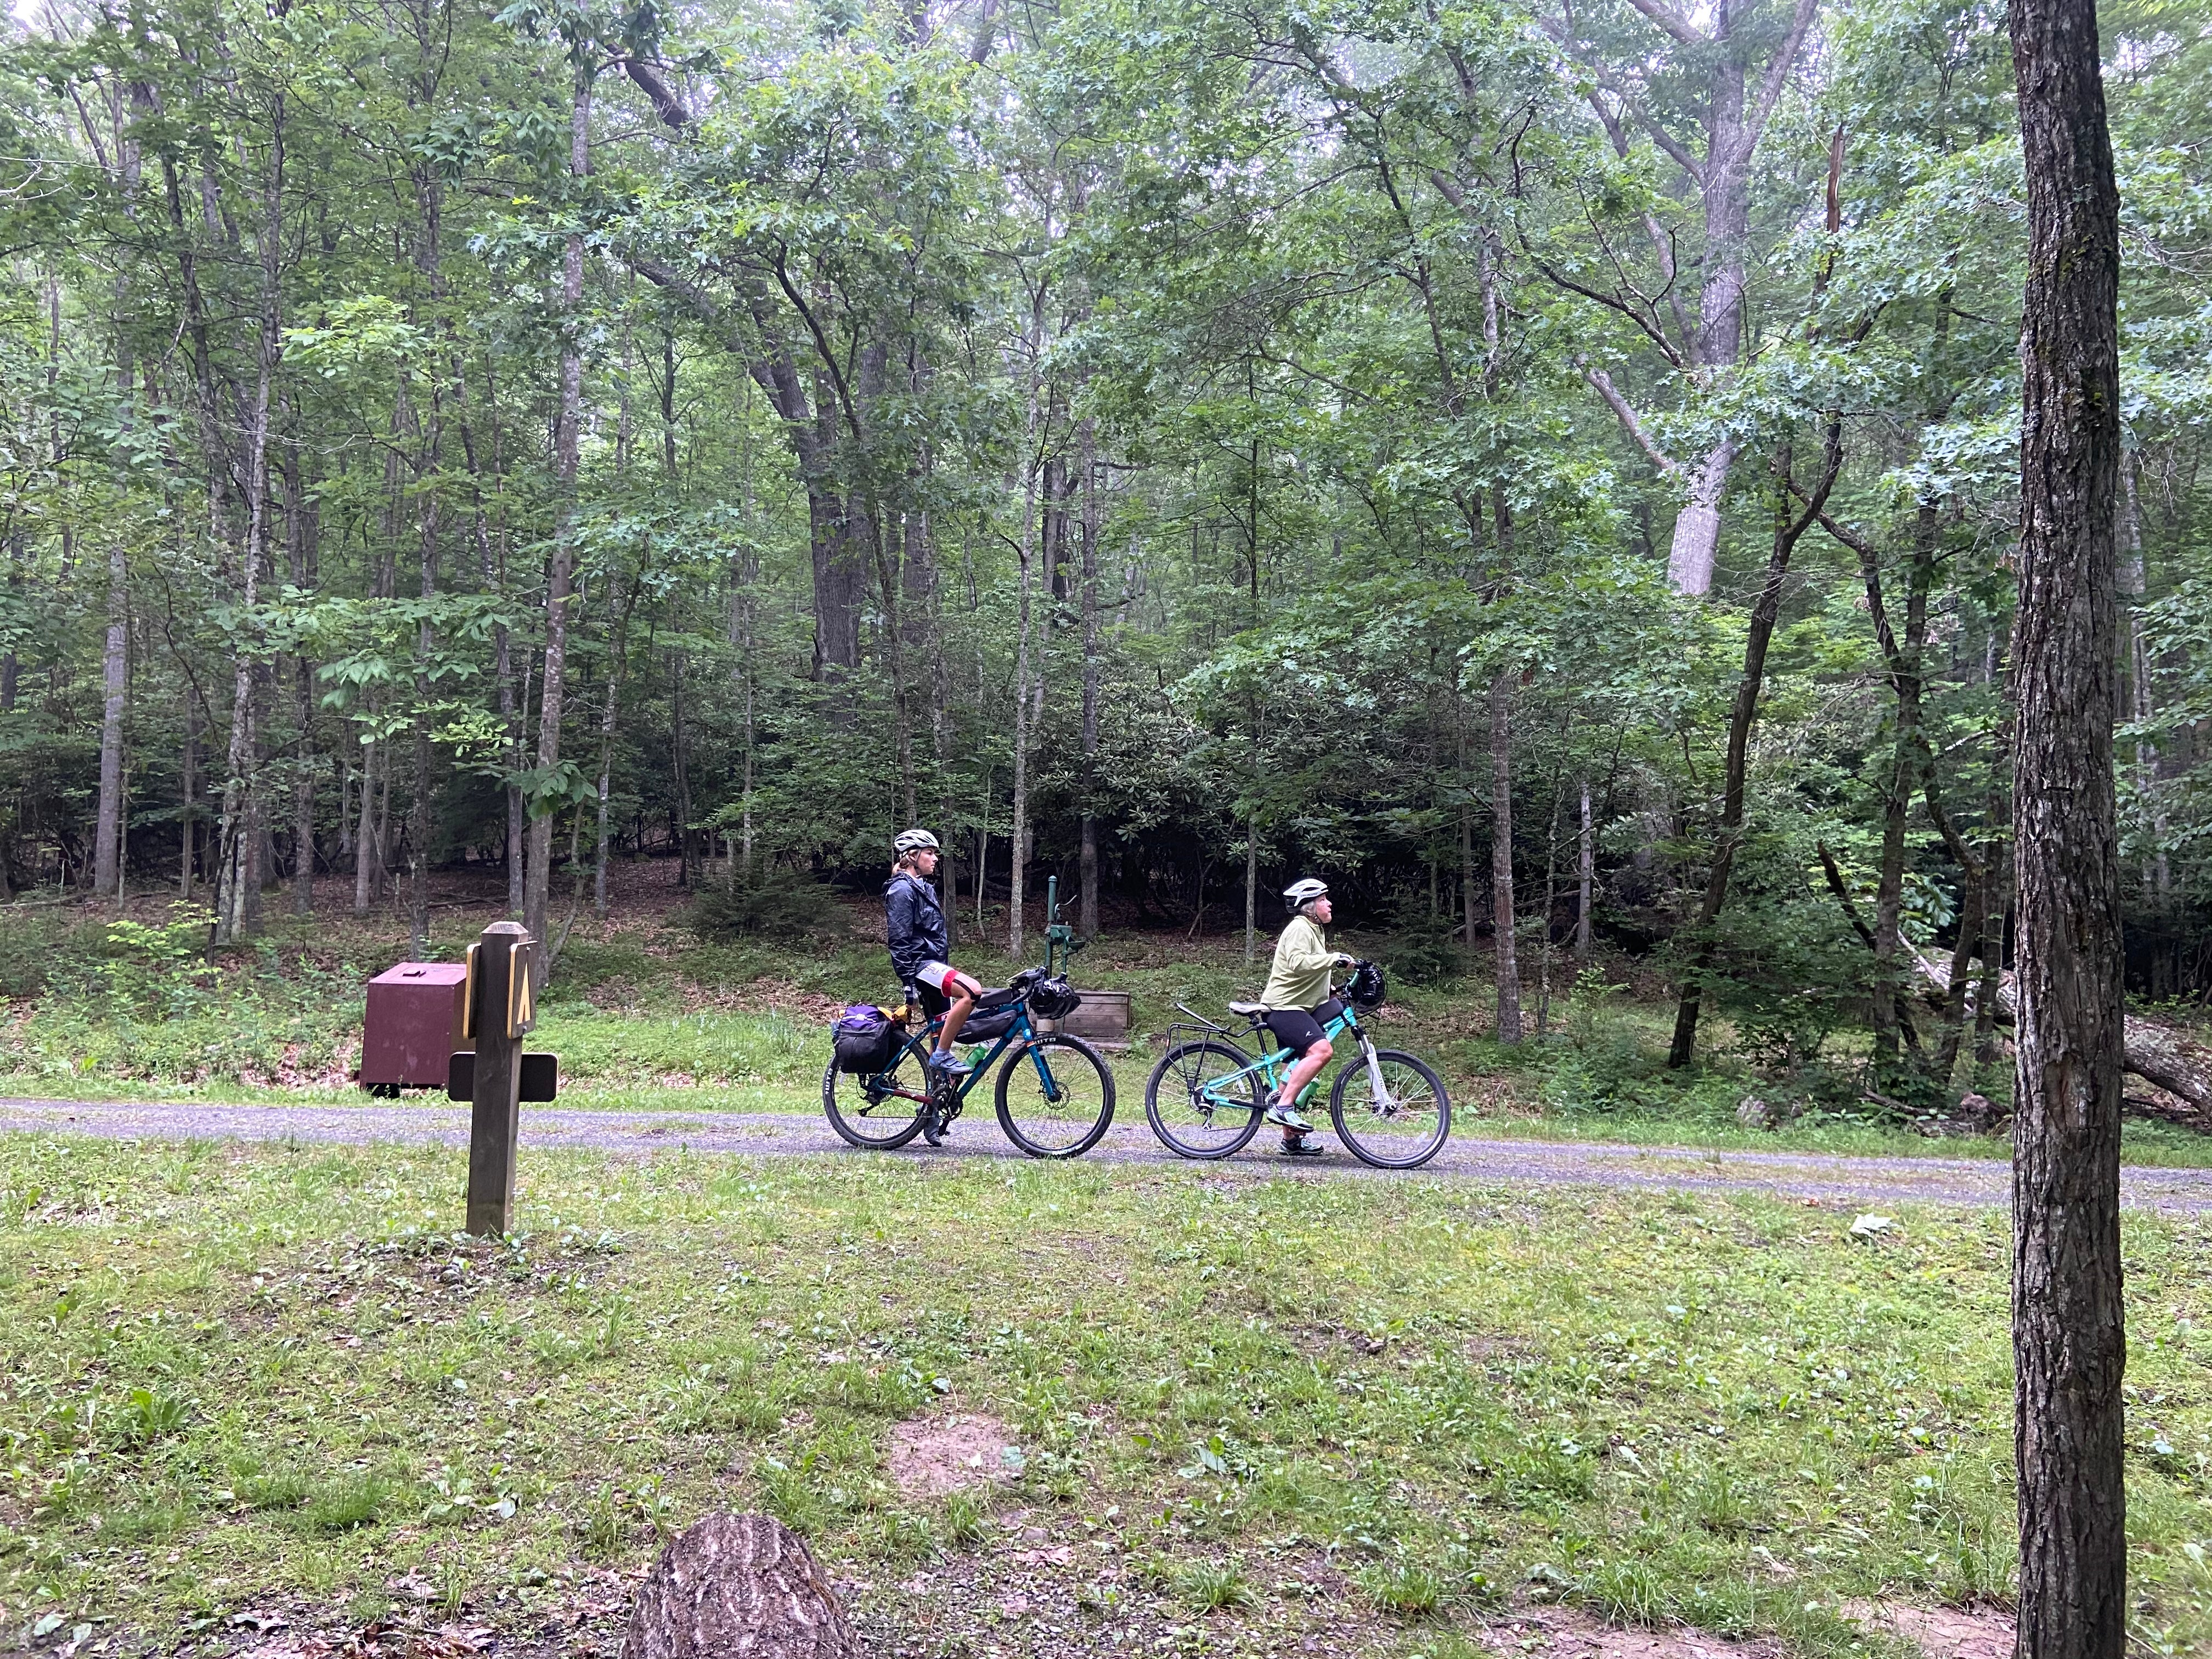 Camper submitted image from Greenbrier River Trail Mile Post 28.5 Primitive Campsite - 5